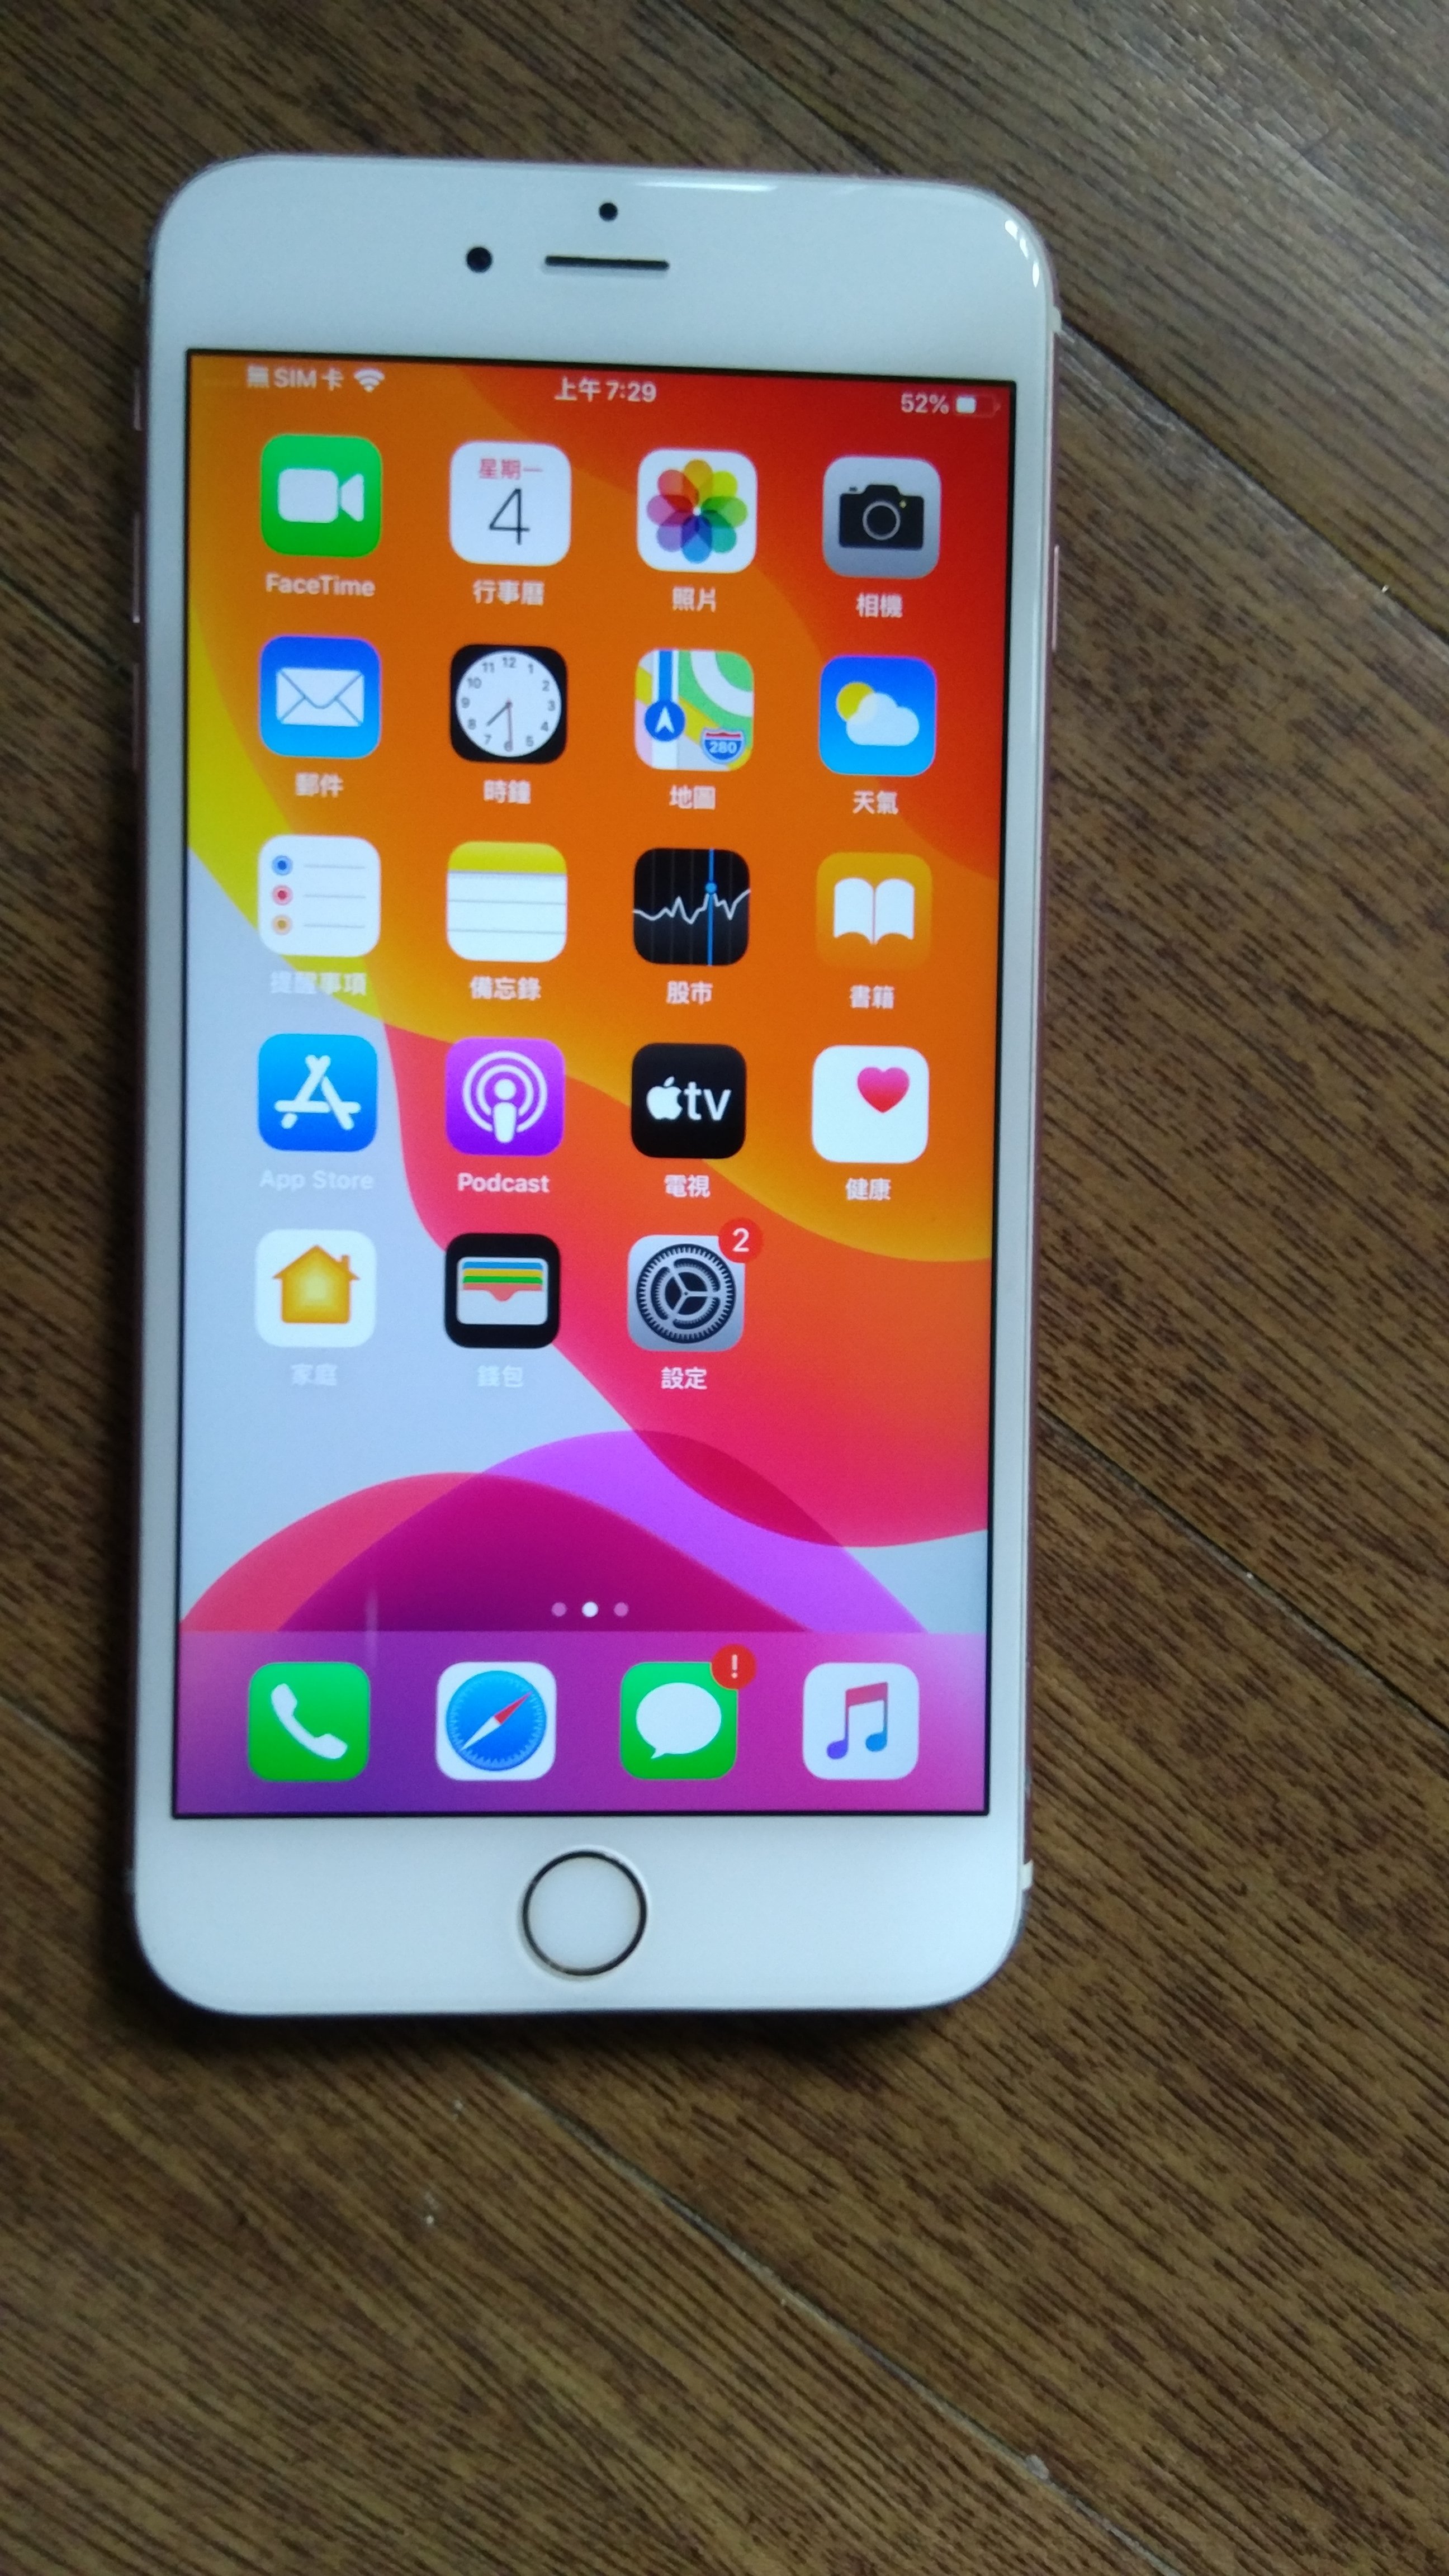 Best Buy: Apple iPhone 6s Plus 64GB Rose Gold (AT&T) MKTU2LL/A